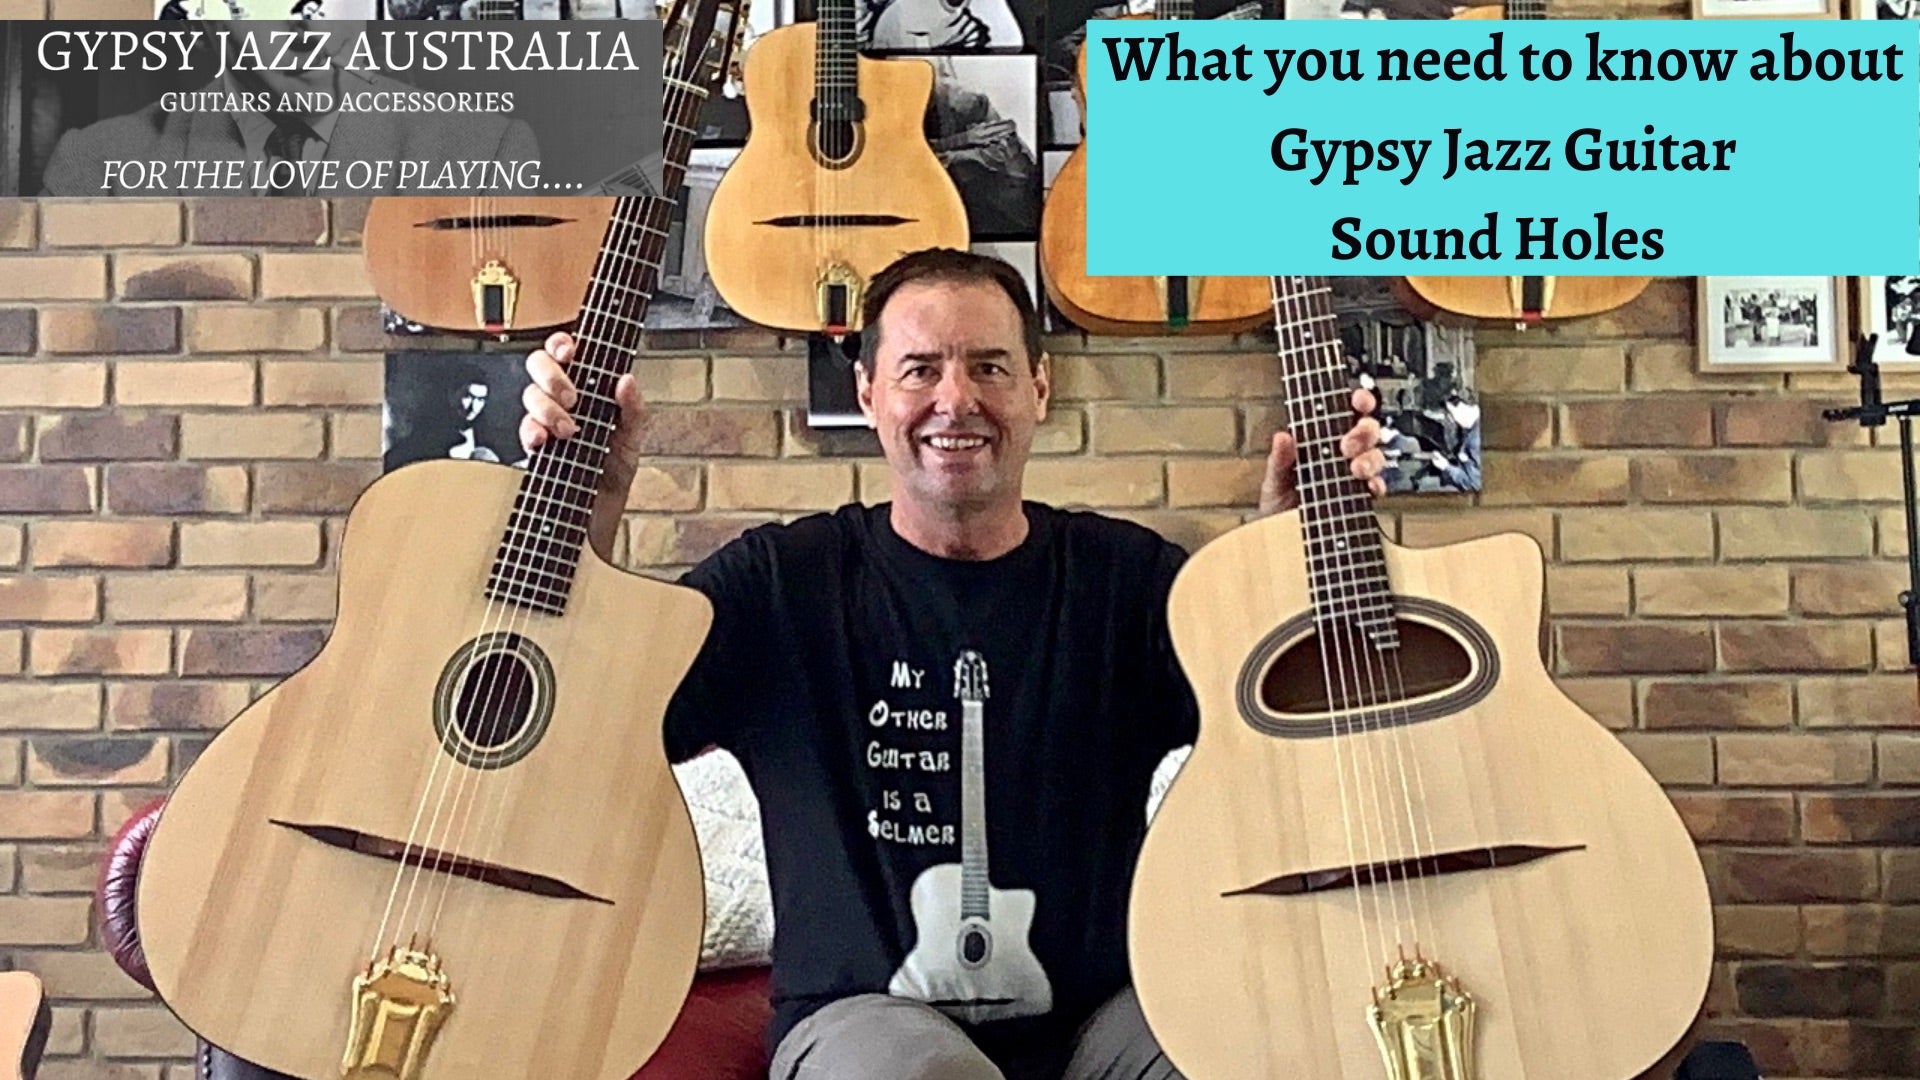 I made a video called "Gypsy Jazz Guitar Sound Holes"?